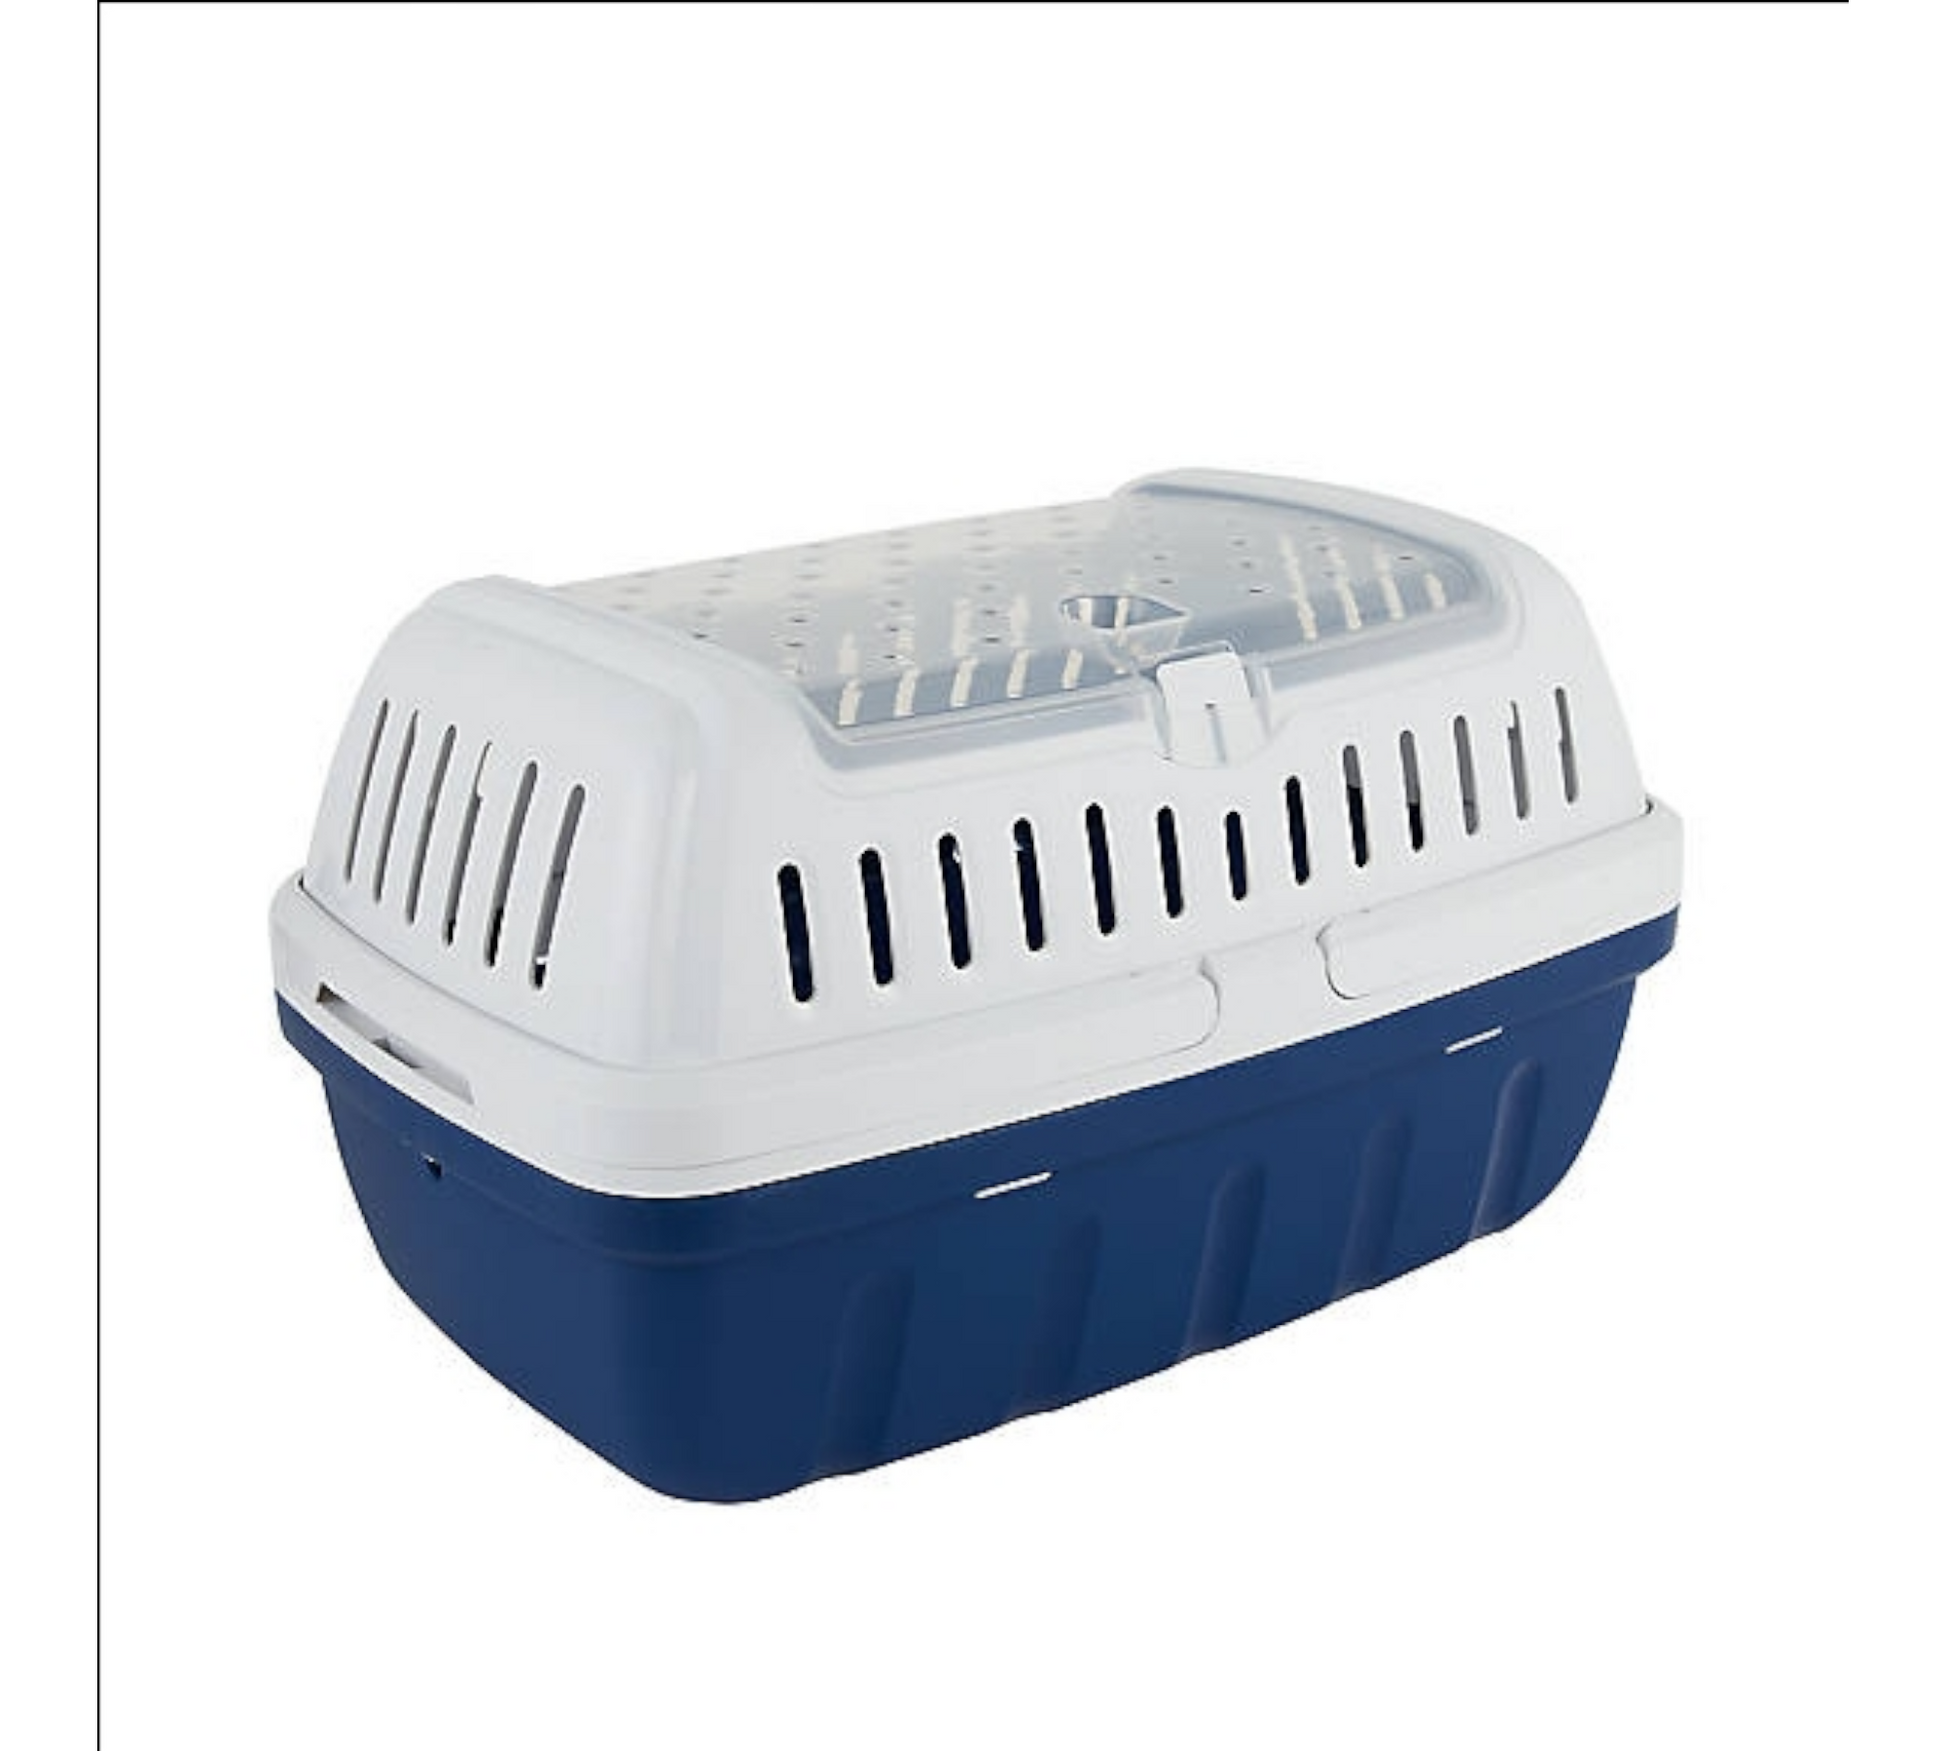 Canine's World Carrier Small Pet Top Entry Travel Carrier PS